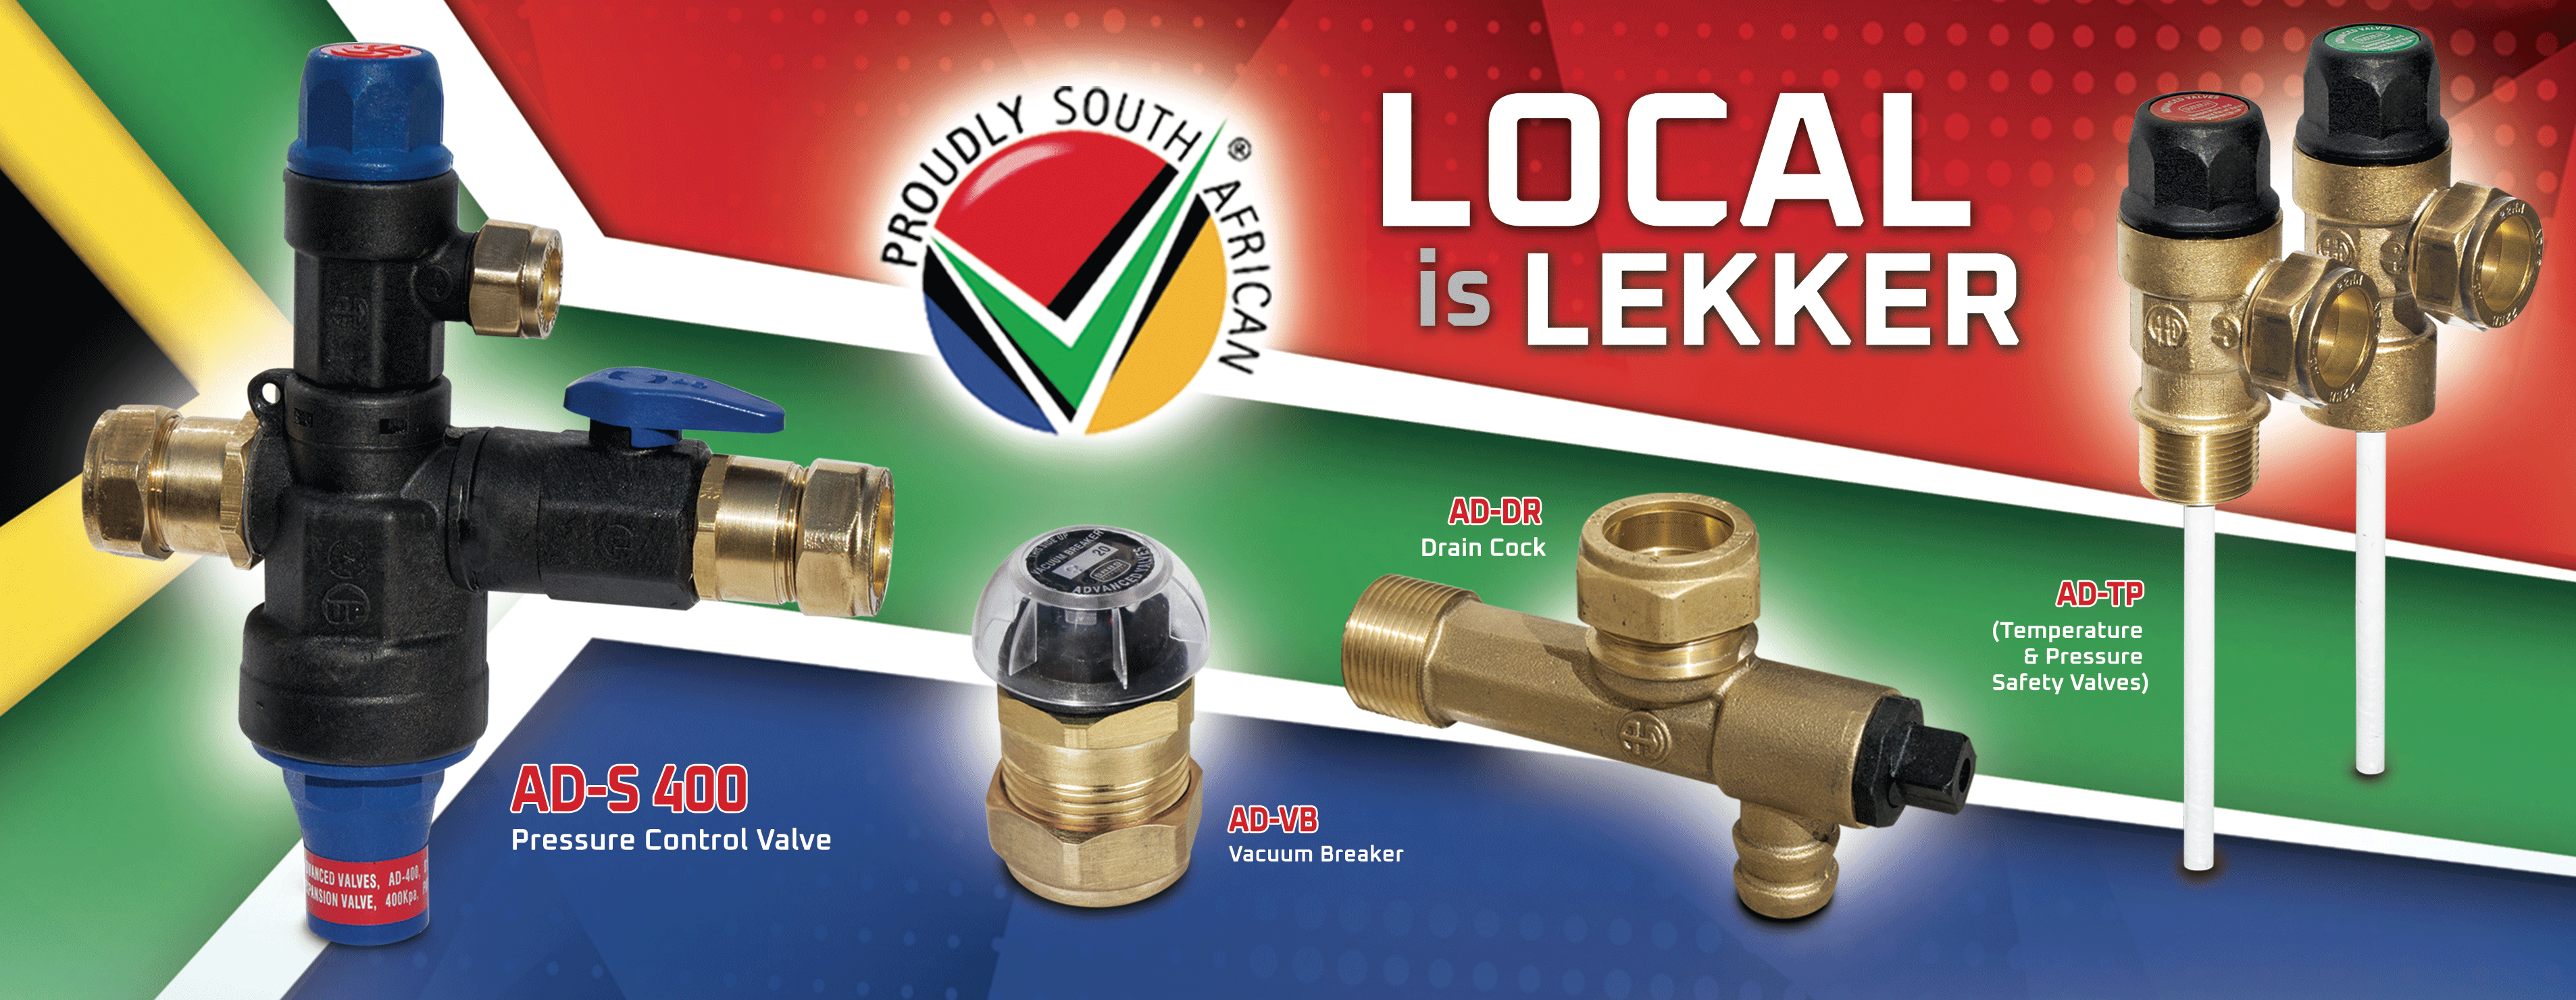 Proudly South African geyser related products